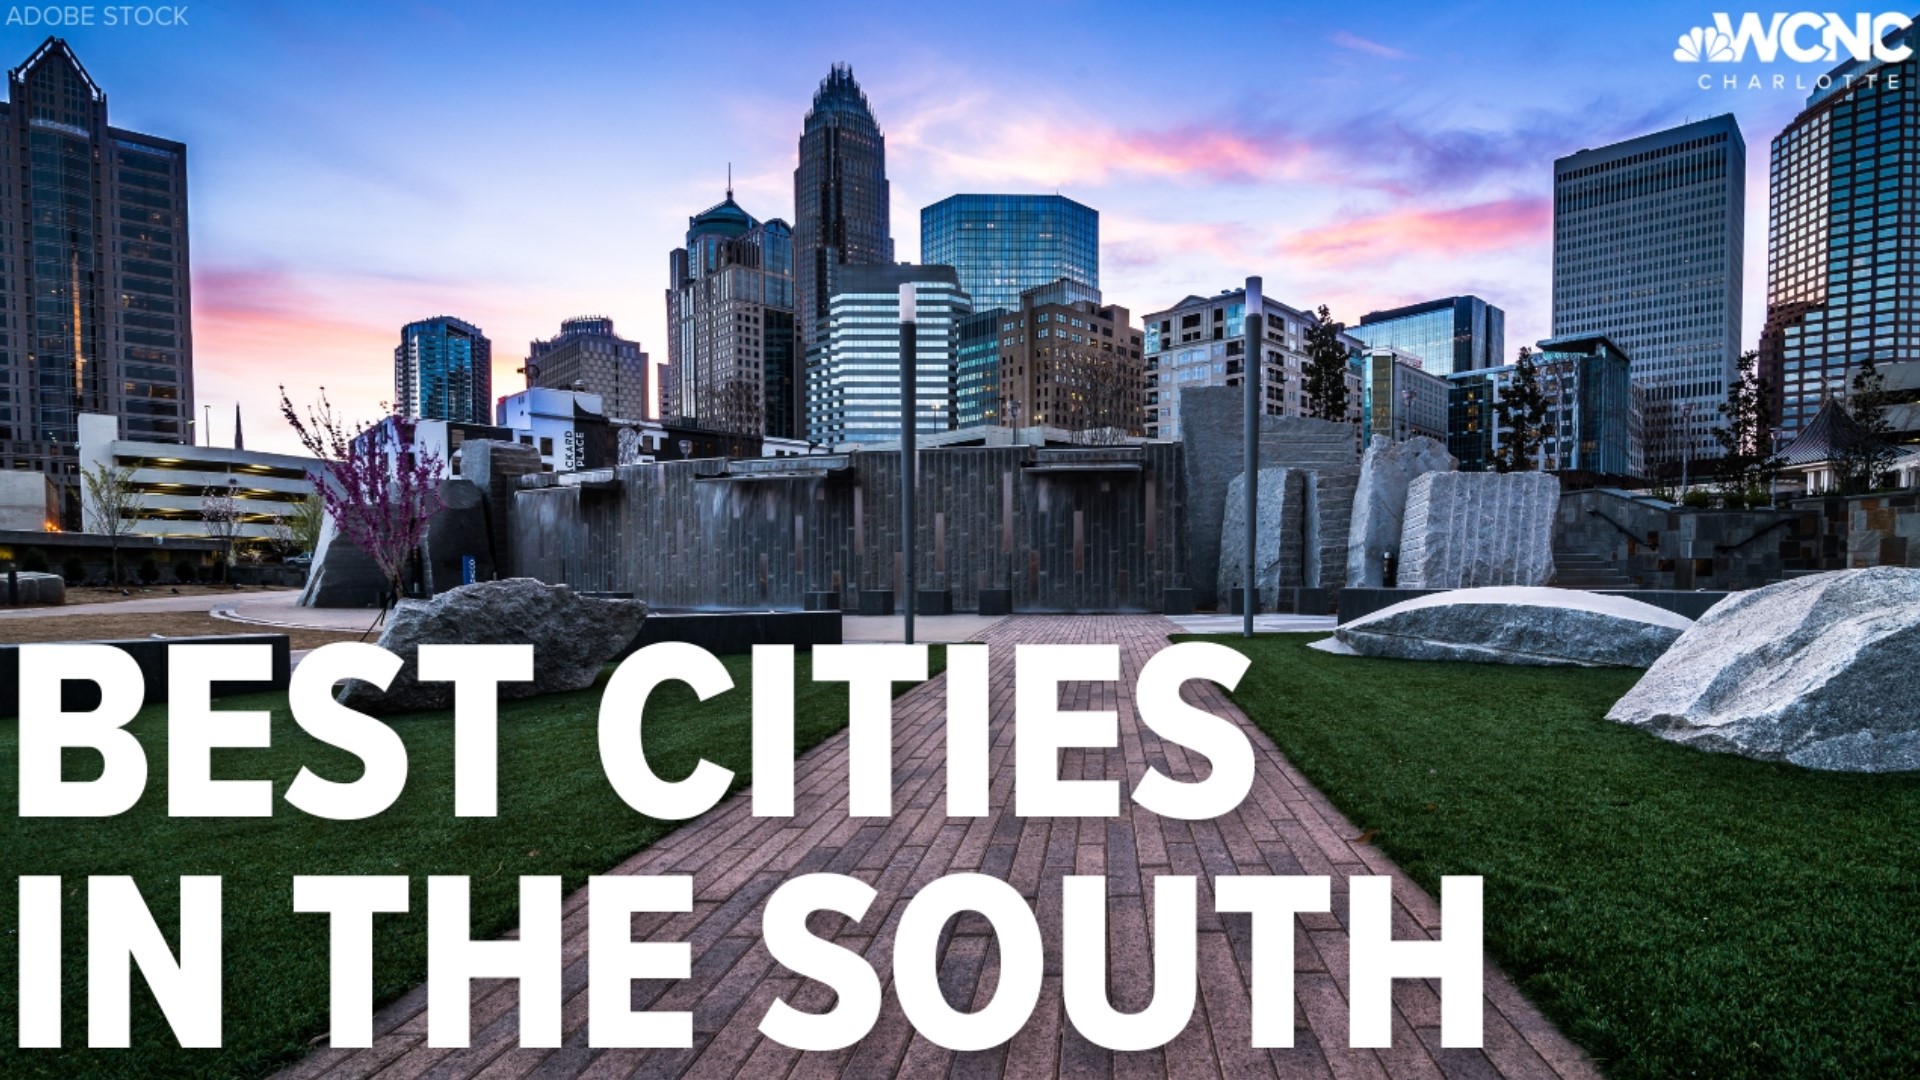 Charlotte ranks just behind Austin, Texas, while other cities in the Carolinas are just as well-ranked!